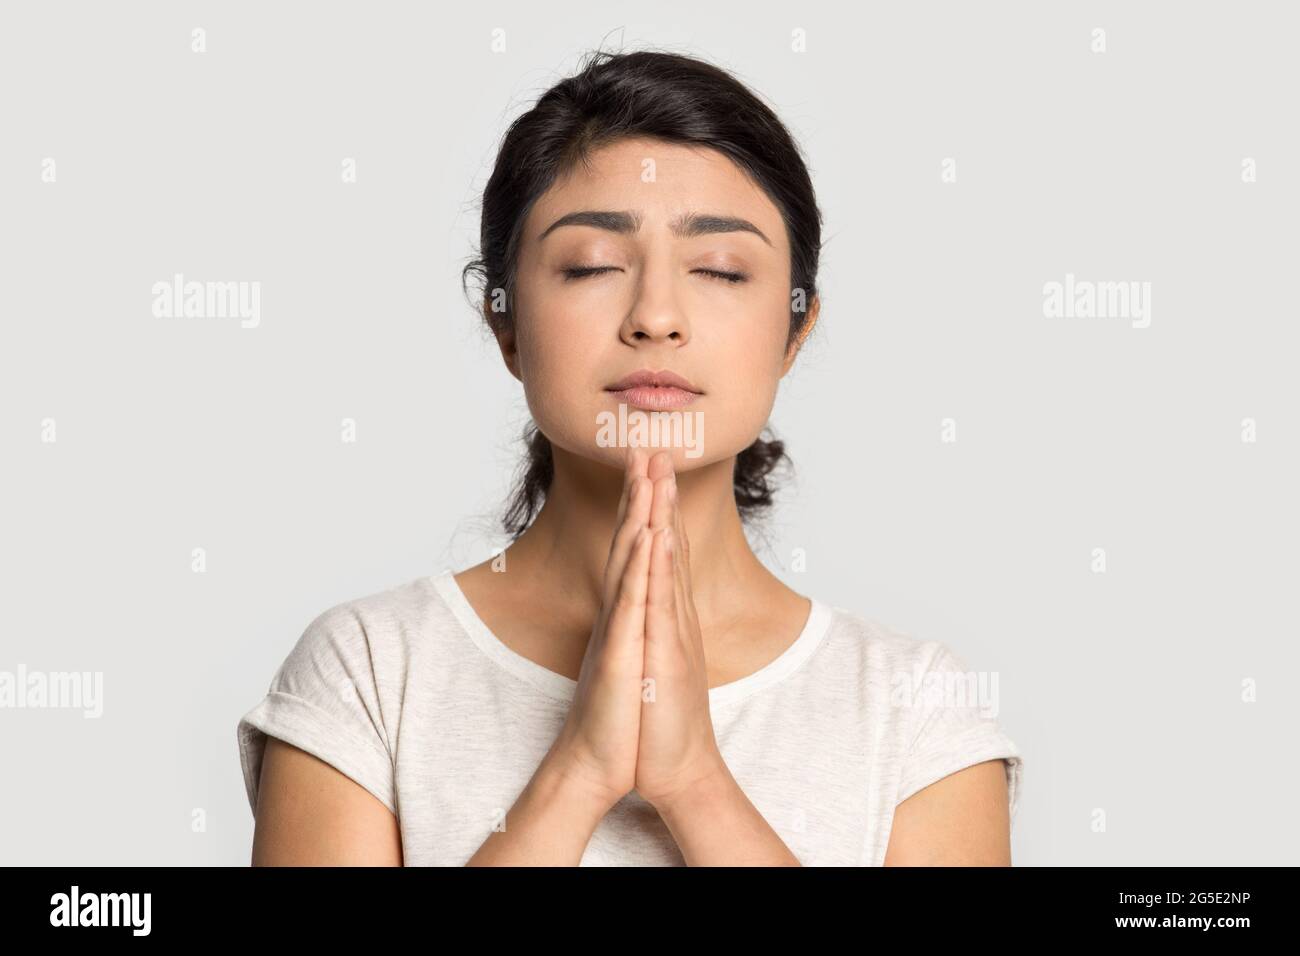 Hopeful Indian woman pray ask feeling superstitious Stock Photo